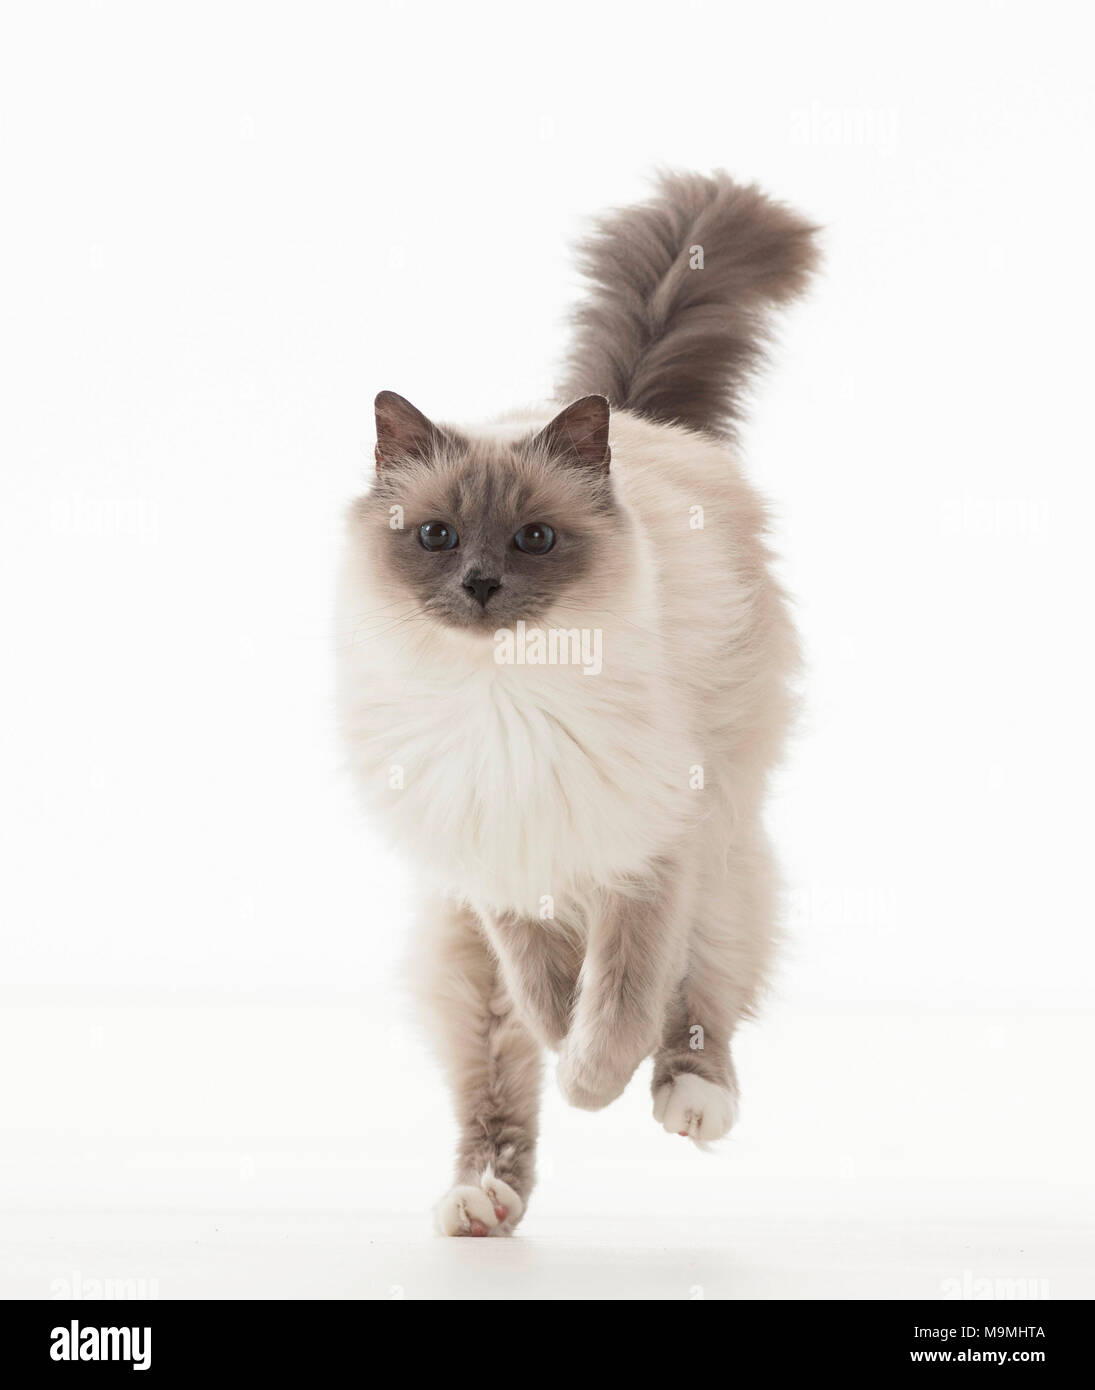 Sacred cat of Burma. Adult running. Studio picture against a white background. Germany Stock Photo